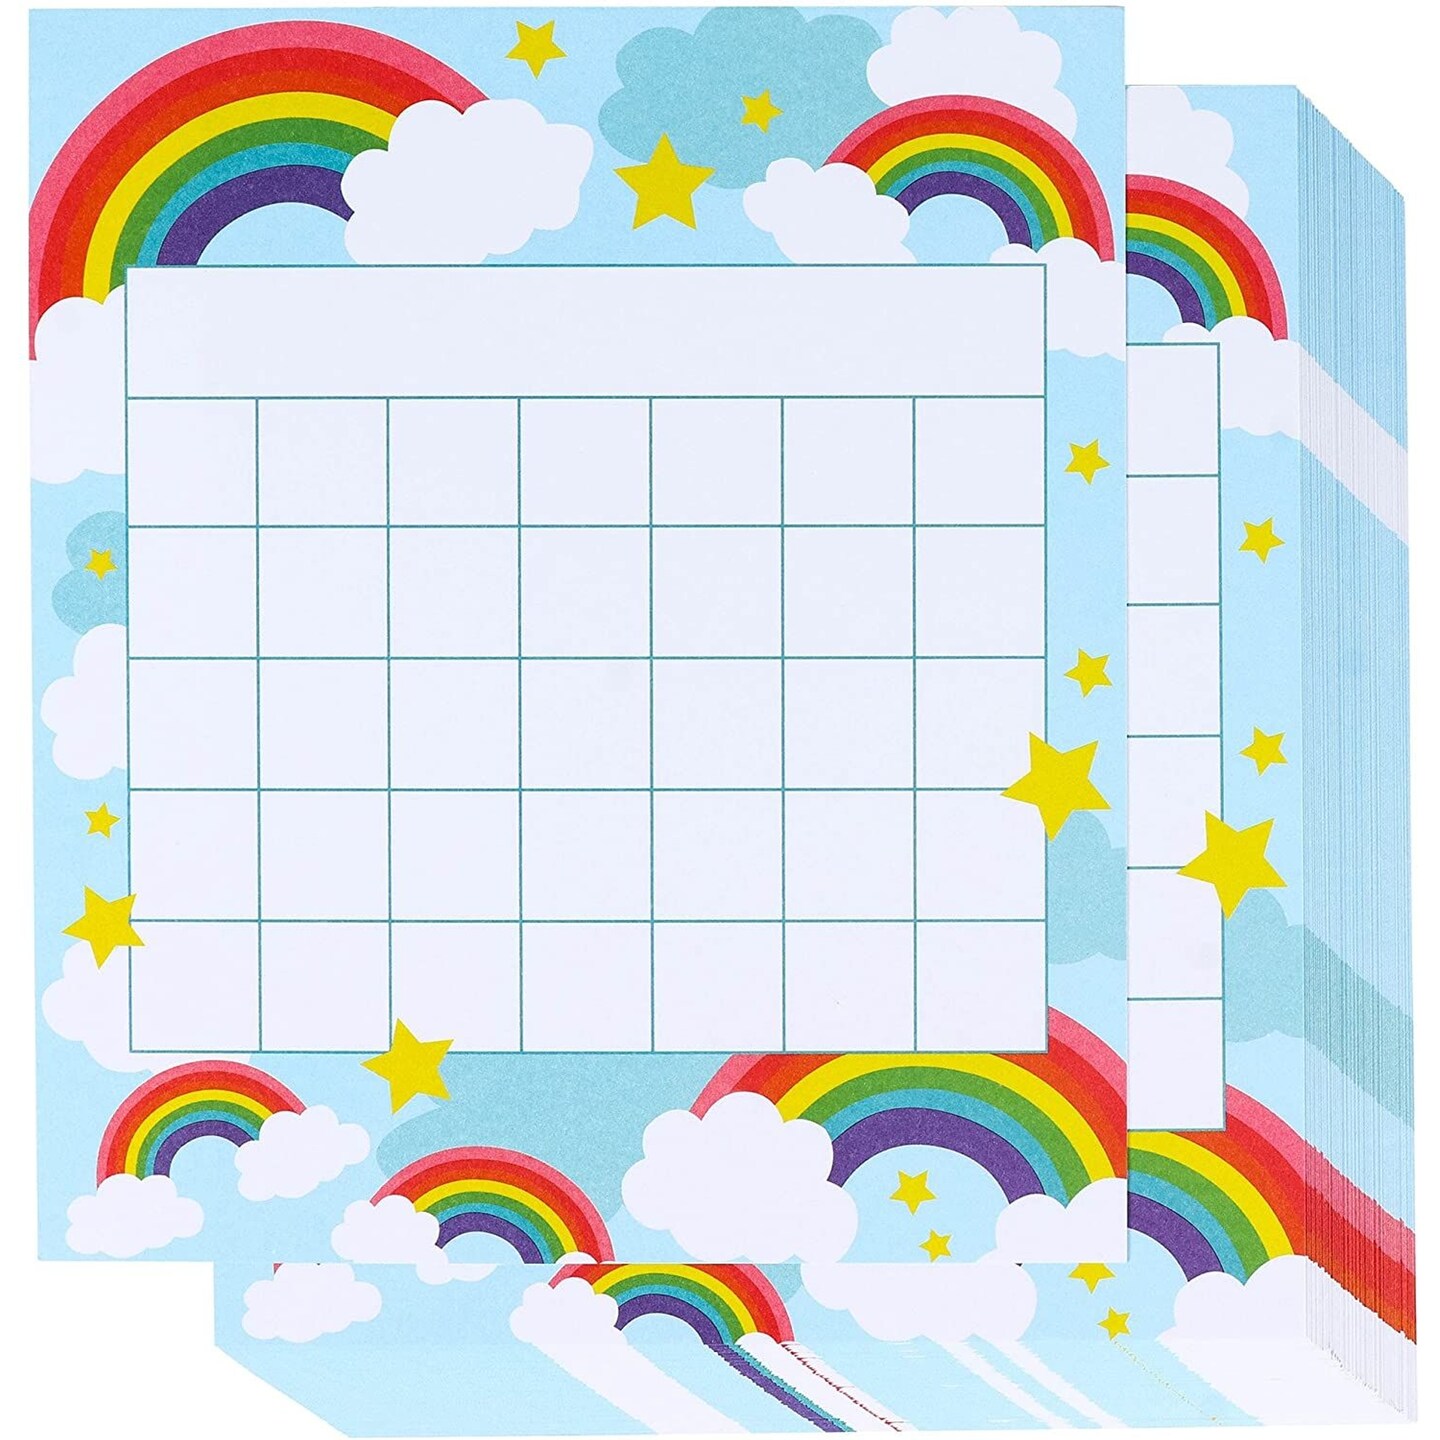 Classroom Incentive Sticker Chart for Kids Behavior (5.25 x 6 in, 60 Pack)